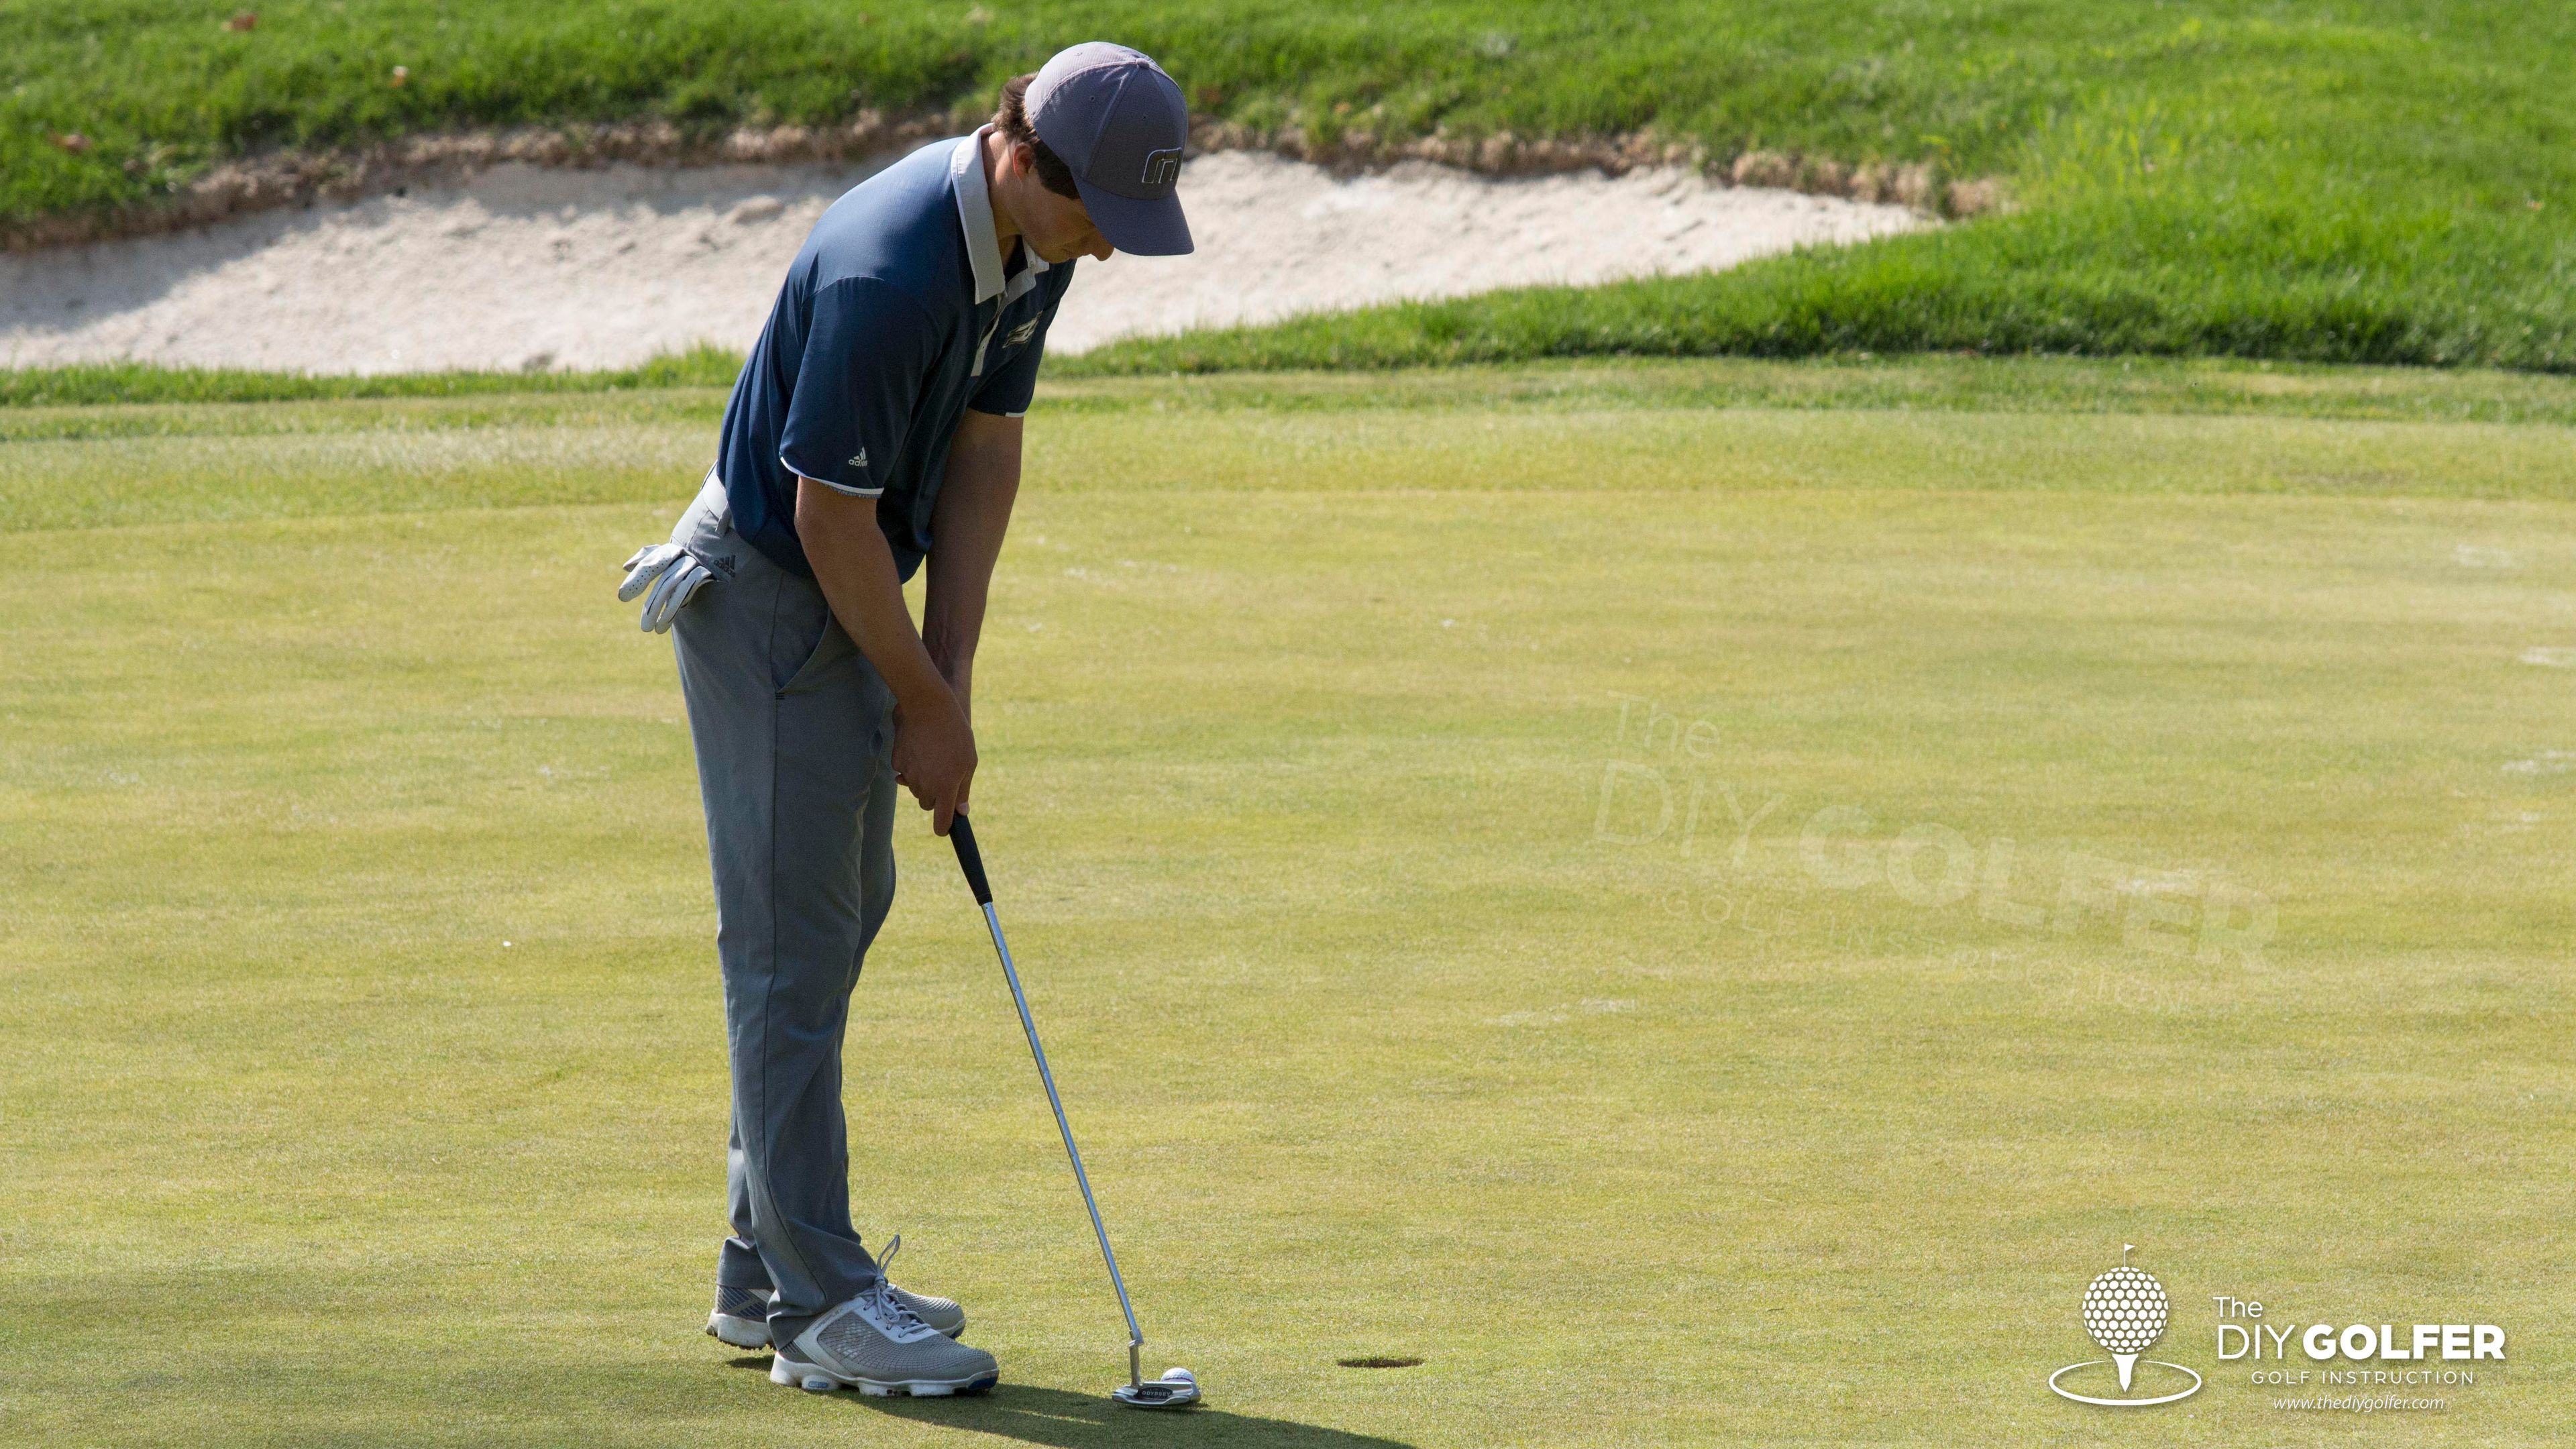 High Quality Golf Putting Image: Tapping in Putt